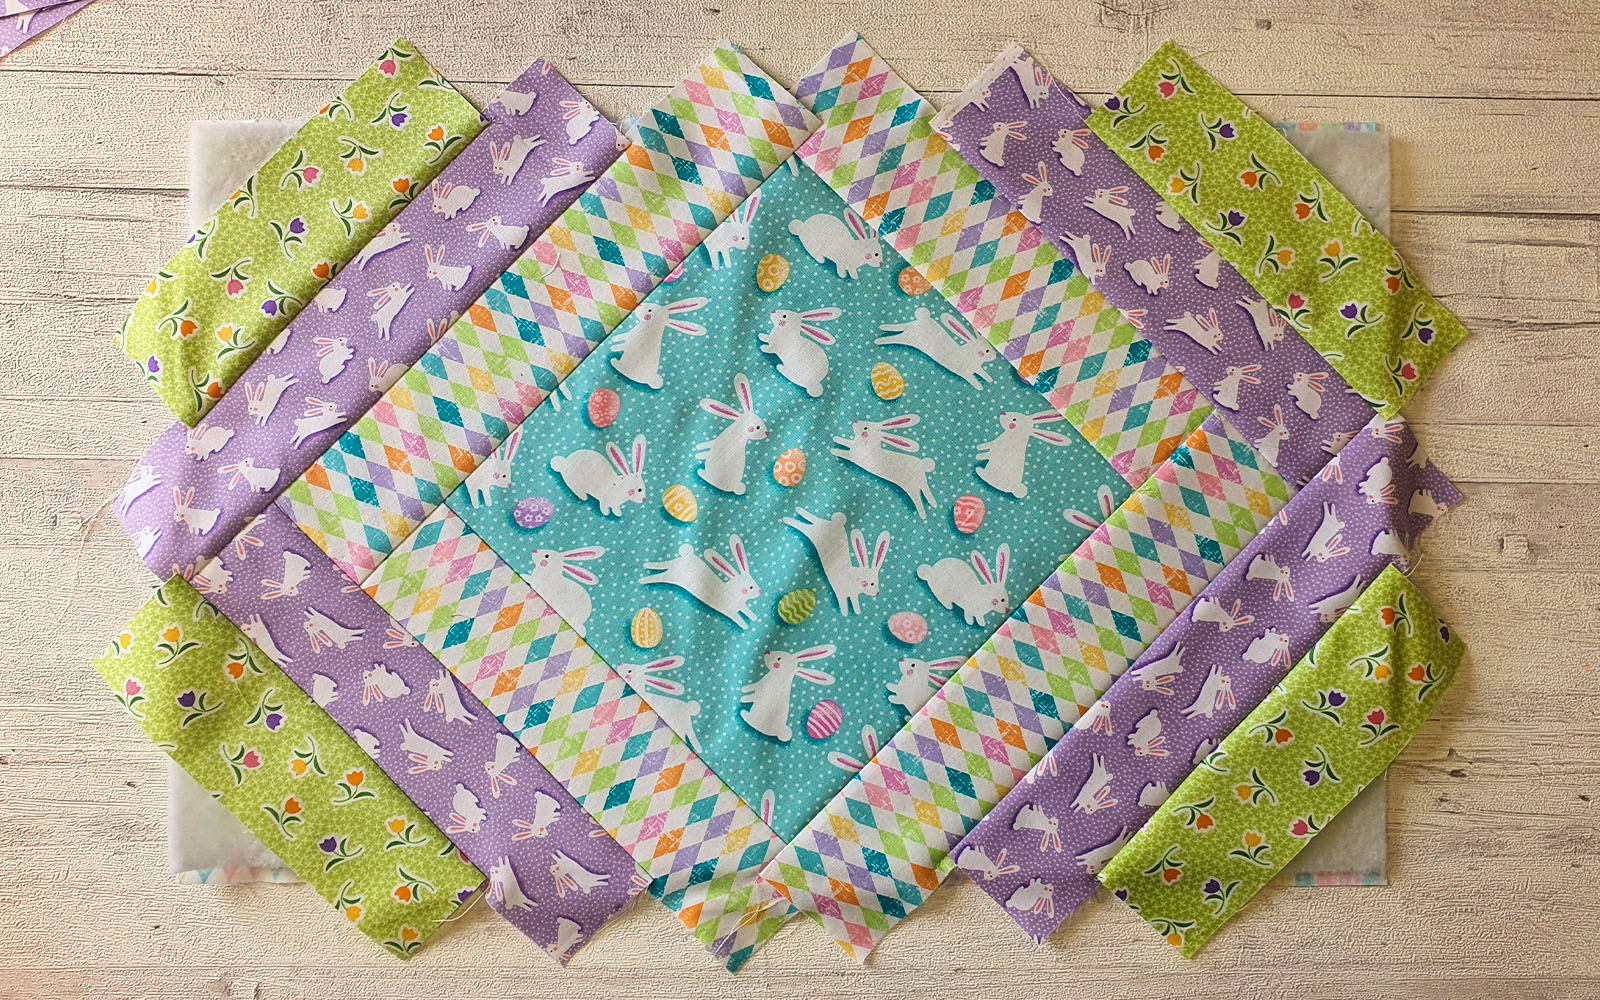 Quilted placemat under construction